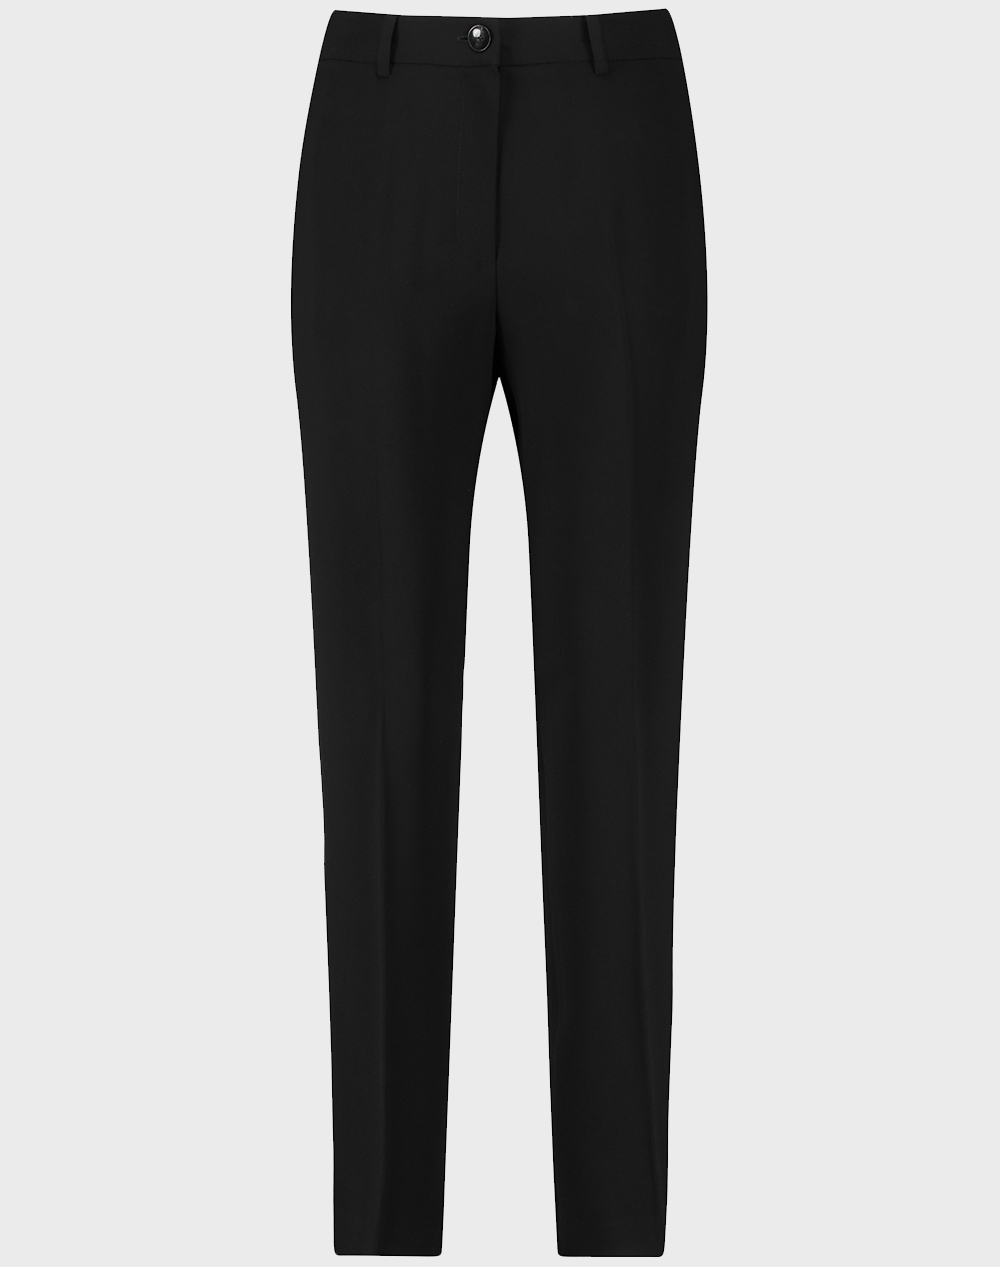 GERRY WEBER PANT CROPPED 925010-71944-11000 Black 3710AGERR2000131_XR01606